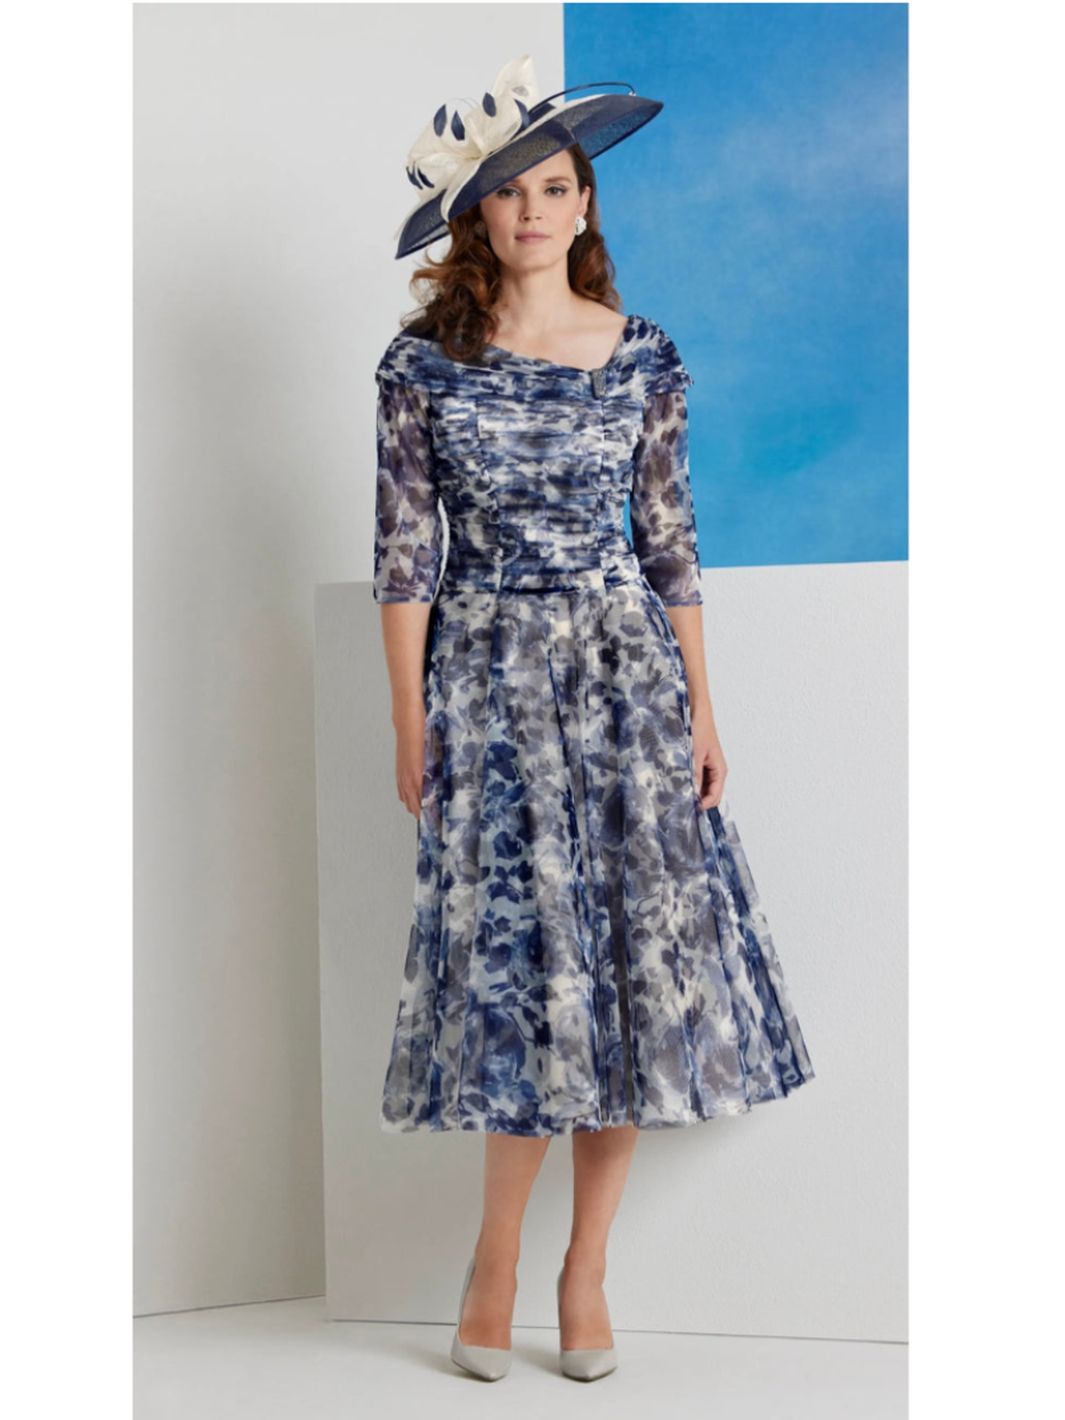 Condici Dress - 71091-Mother of the bride- mother of the groom -Nicola Ross